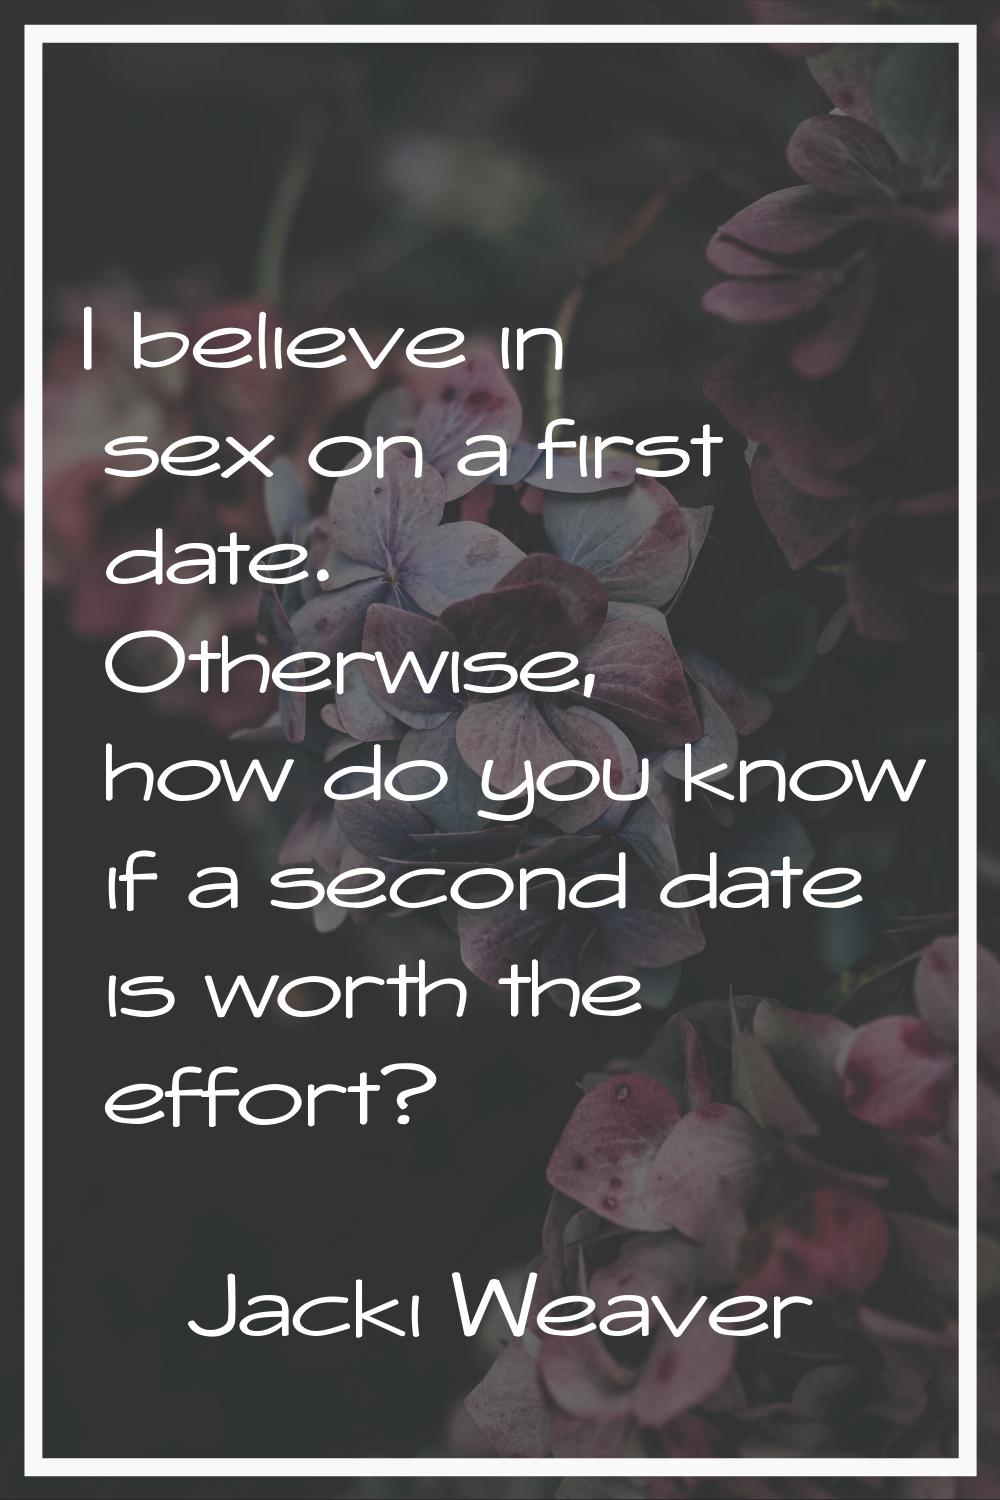 I believe in sex on a first date. Otherwise, how do you know if a second date is worth the effort?